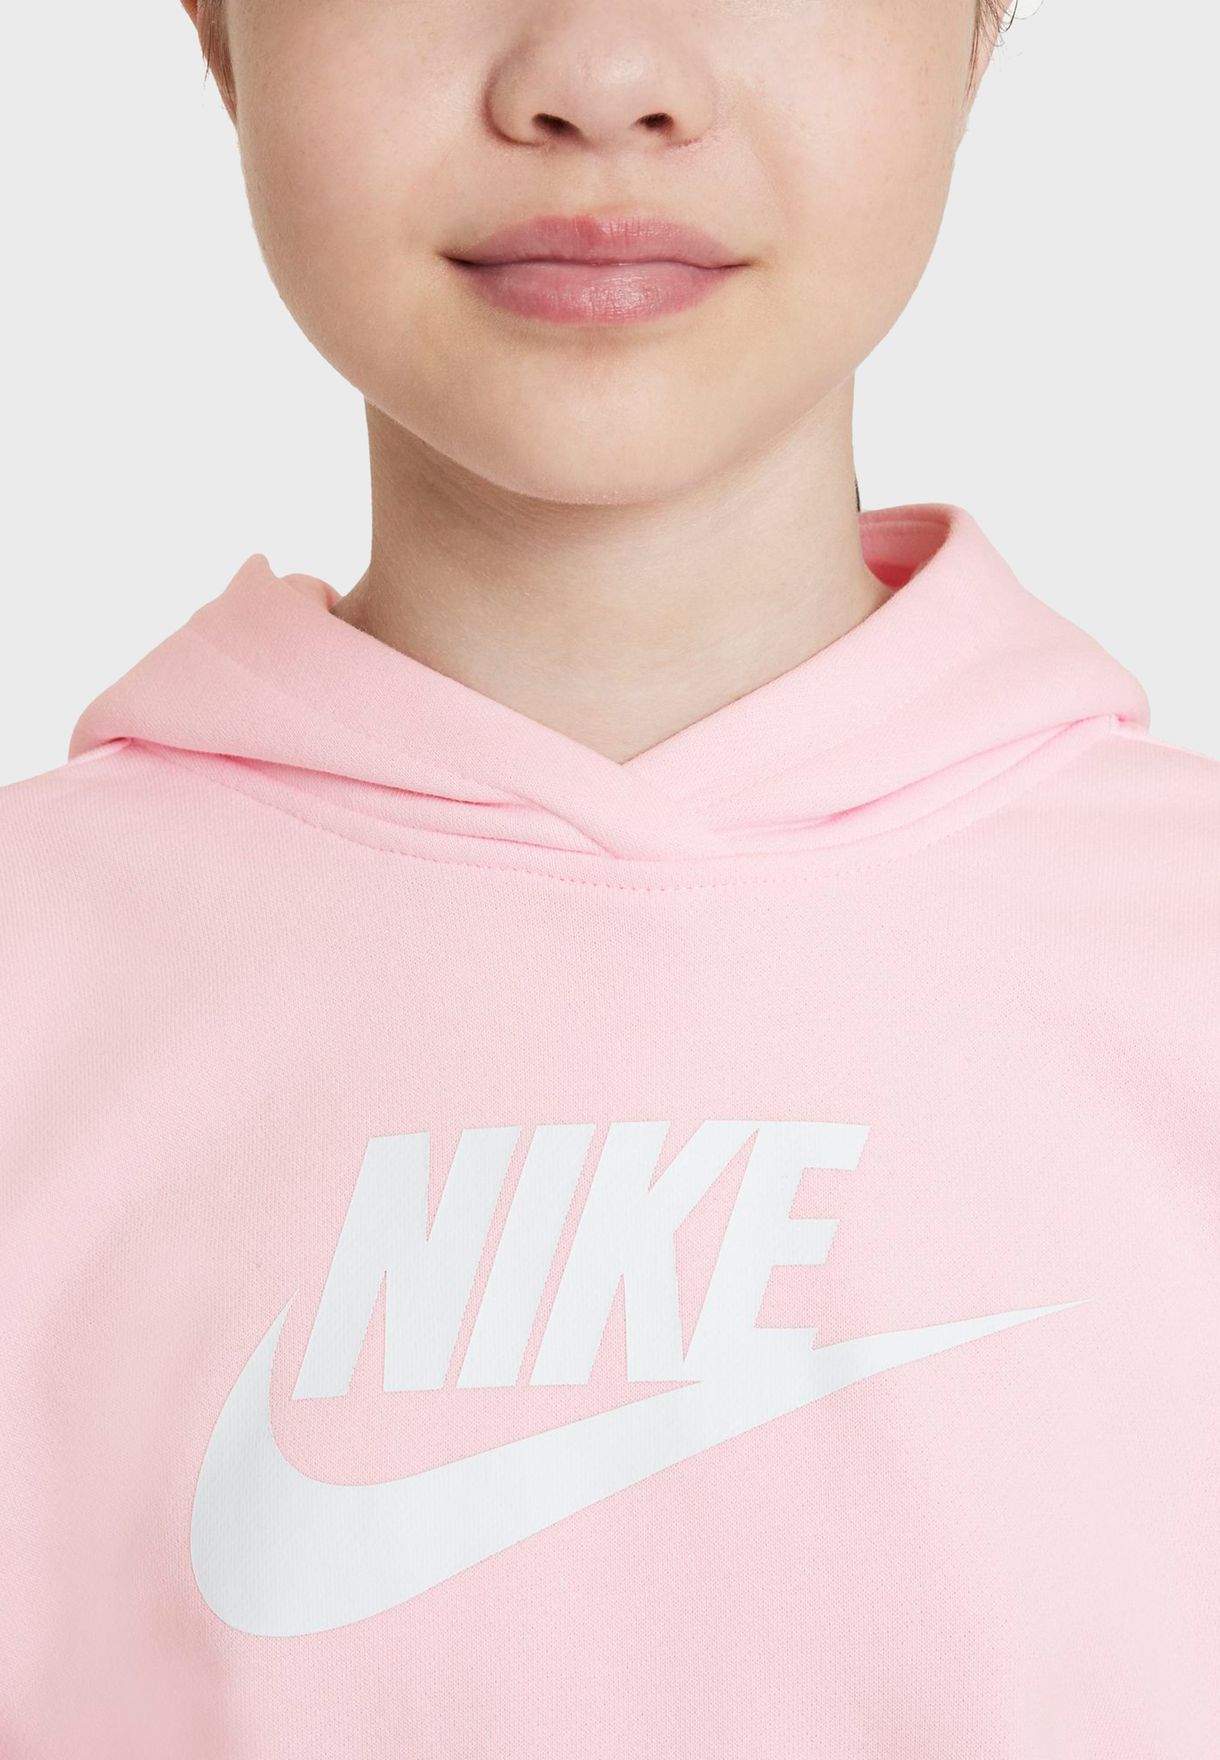 Youth Nsw Club Cropped Hoodie